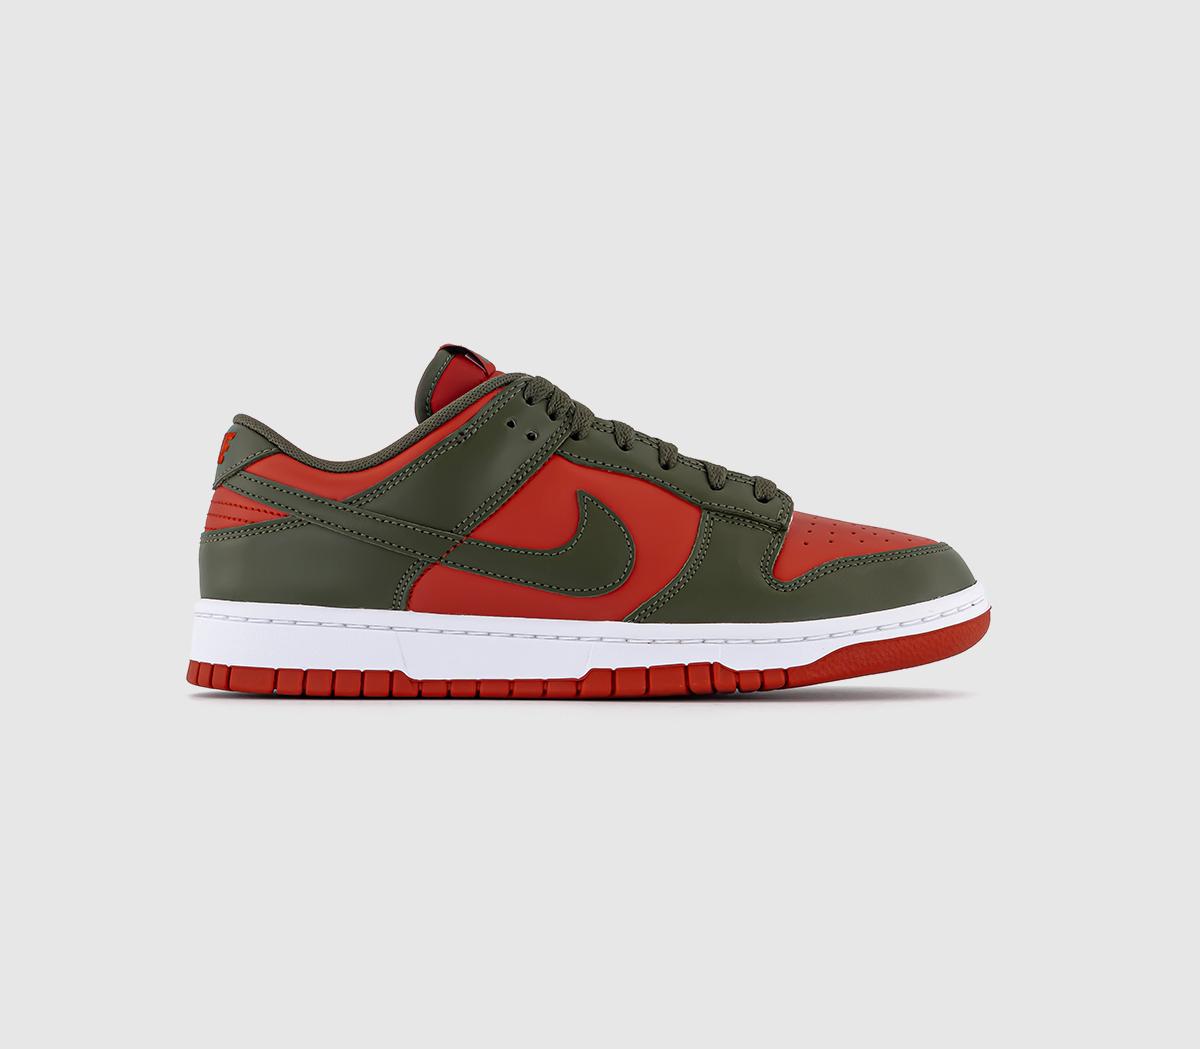 Dunk Low Trainers Mystic Red Cargo Khaki Mystic Red White Cargo Kaha